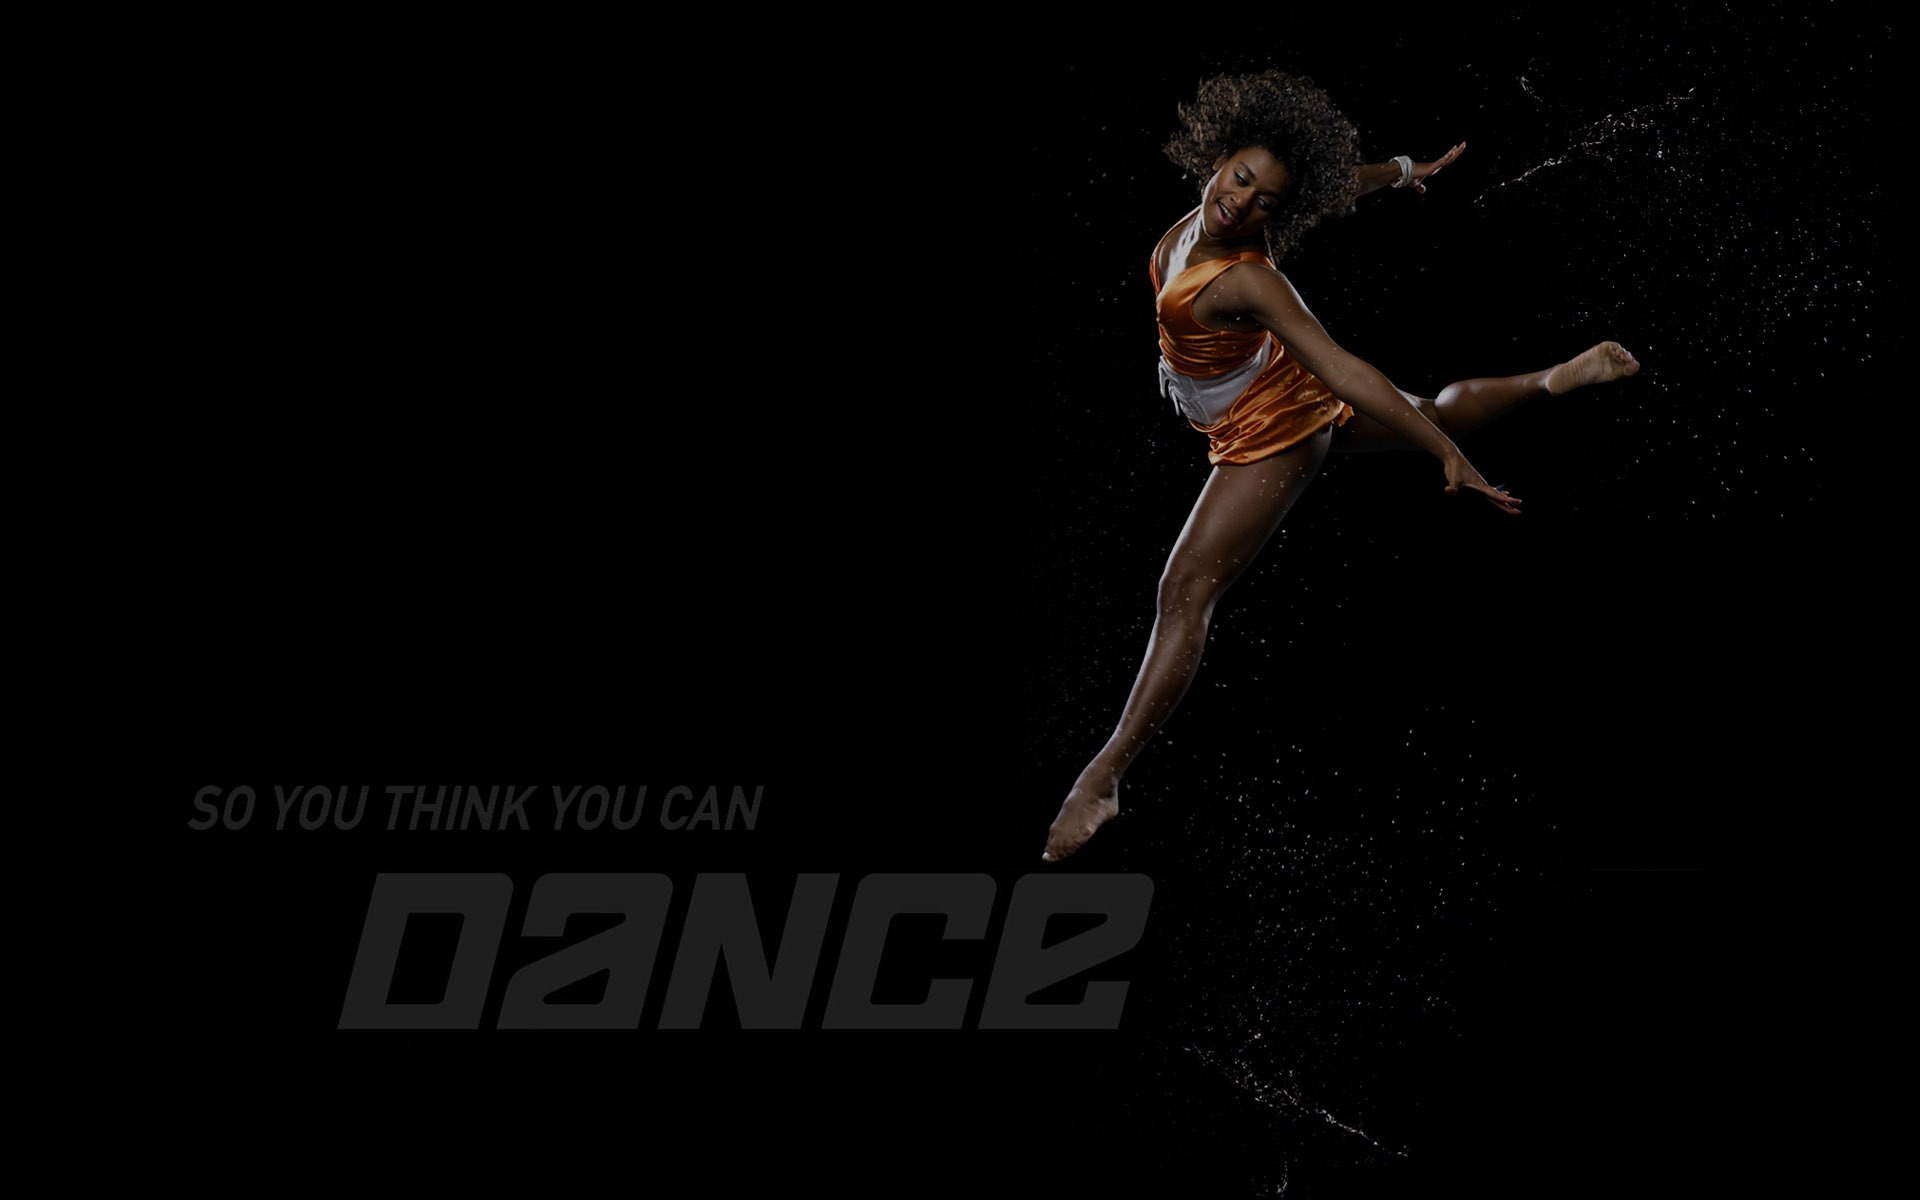 So You Think You Can Dance wallpaper (2) #7 - 1920x1200